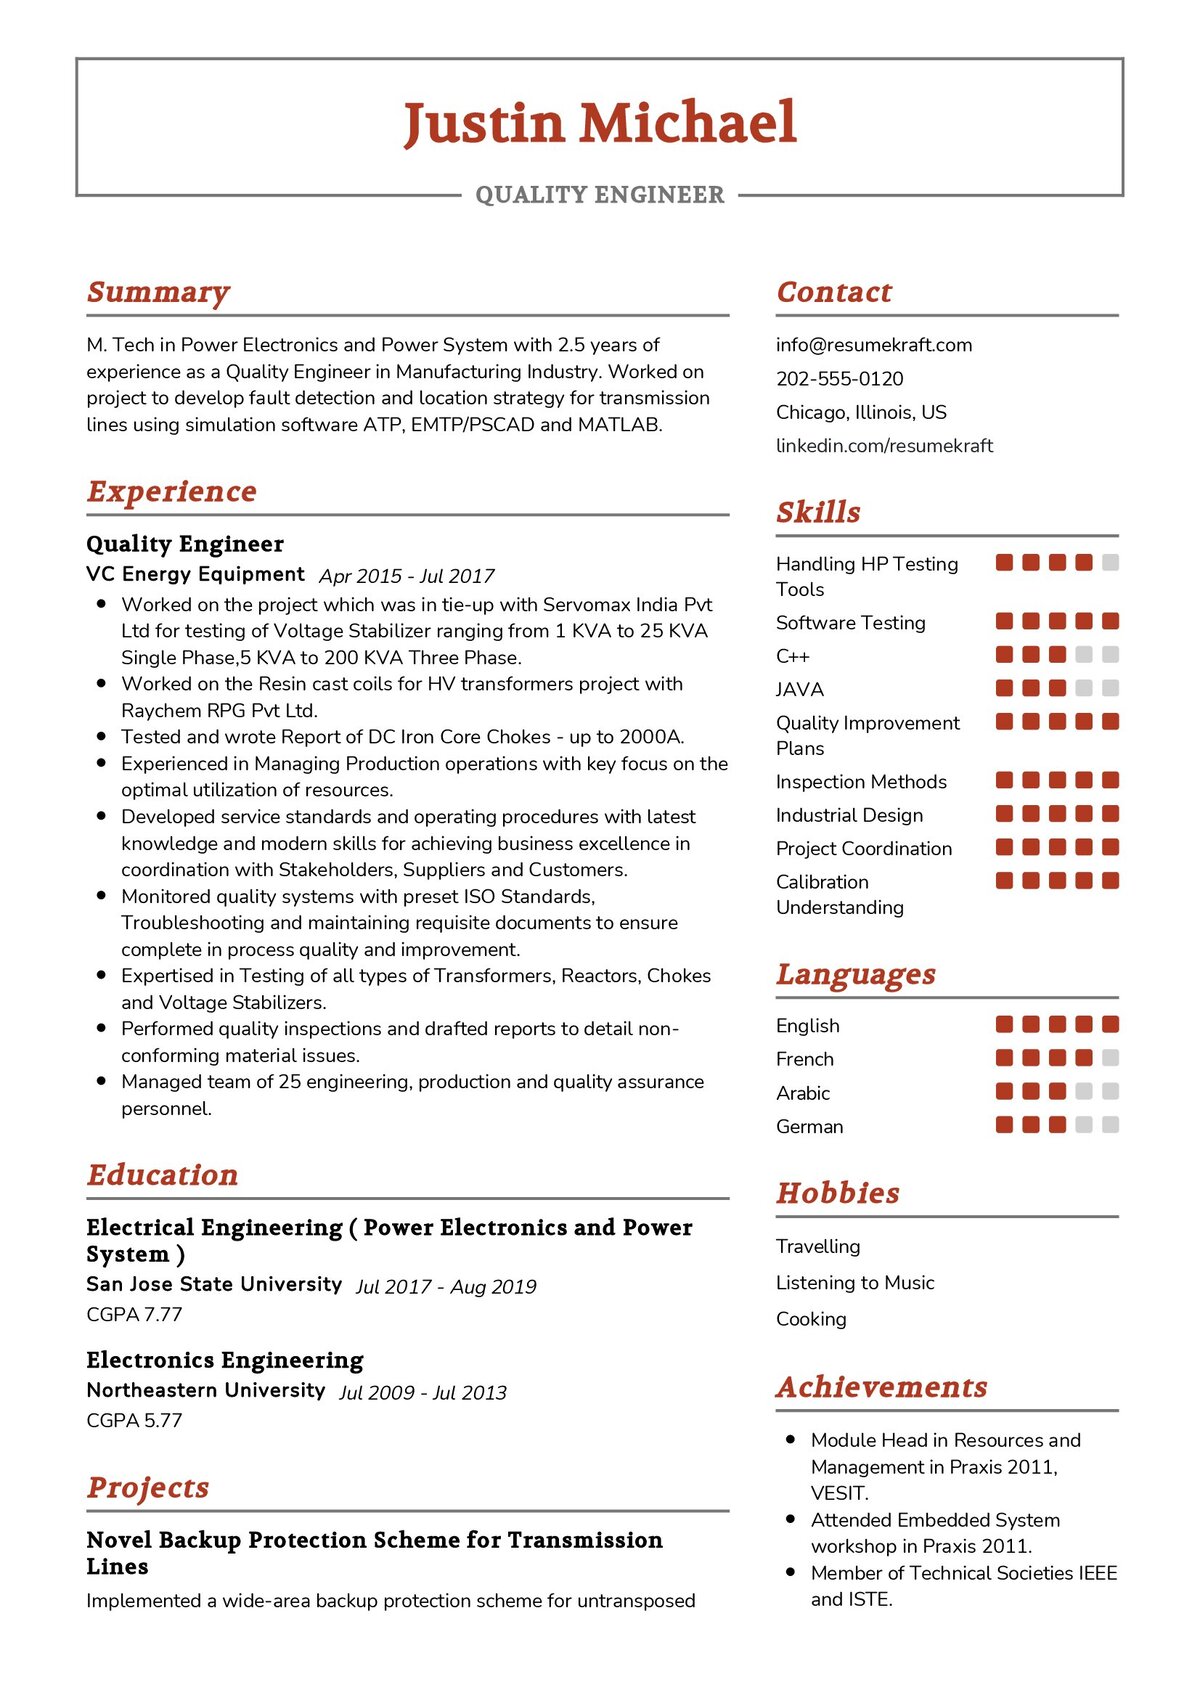 resume format quality engineer